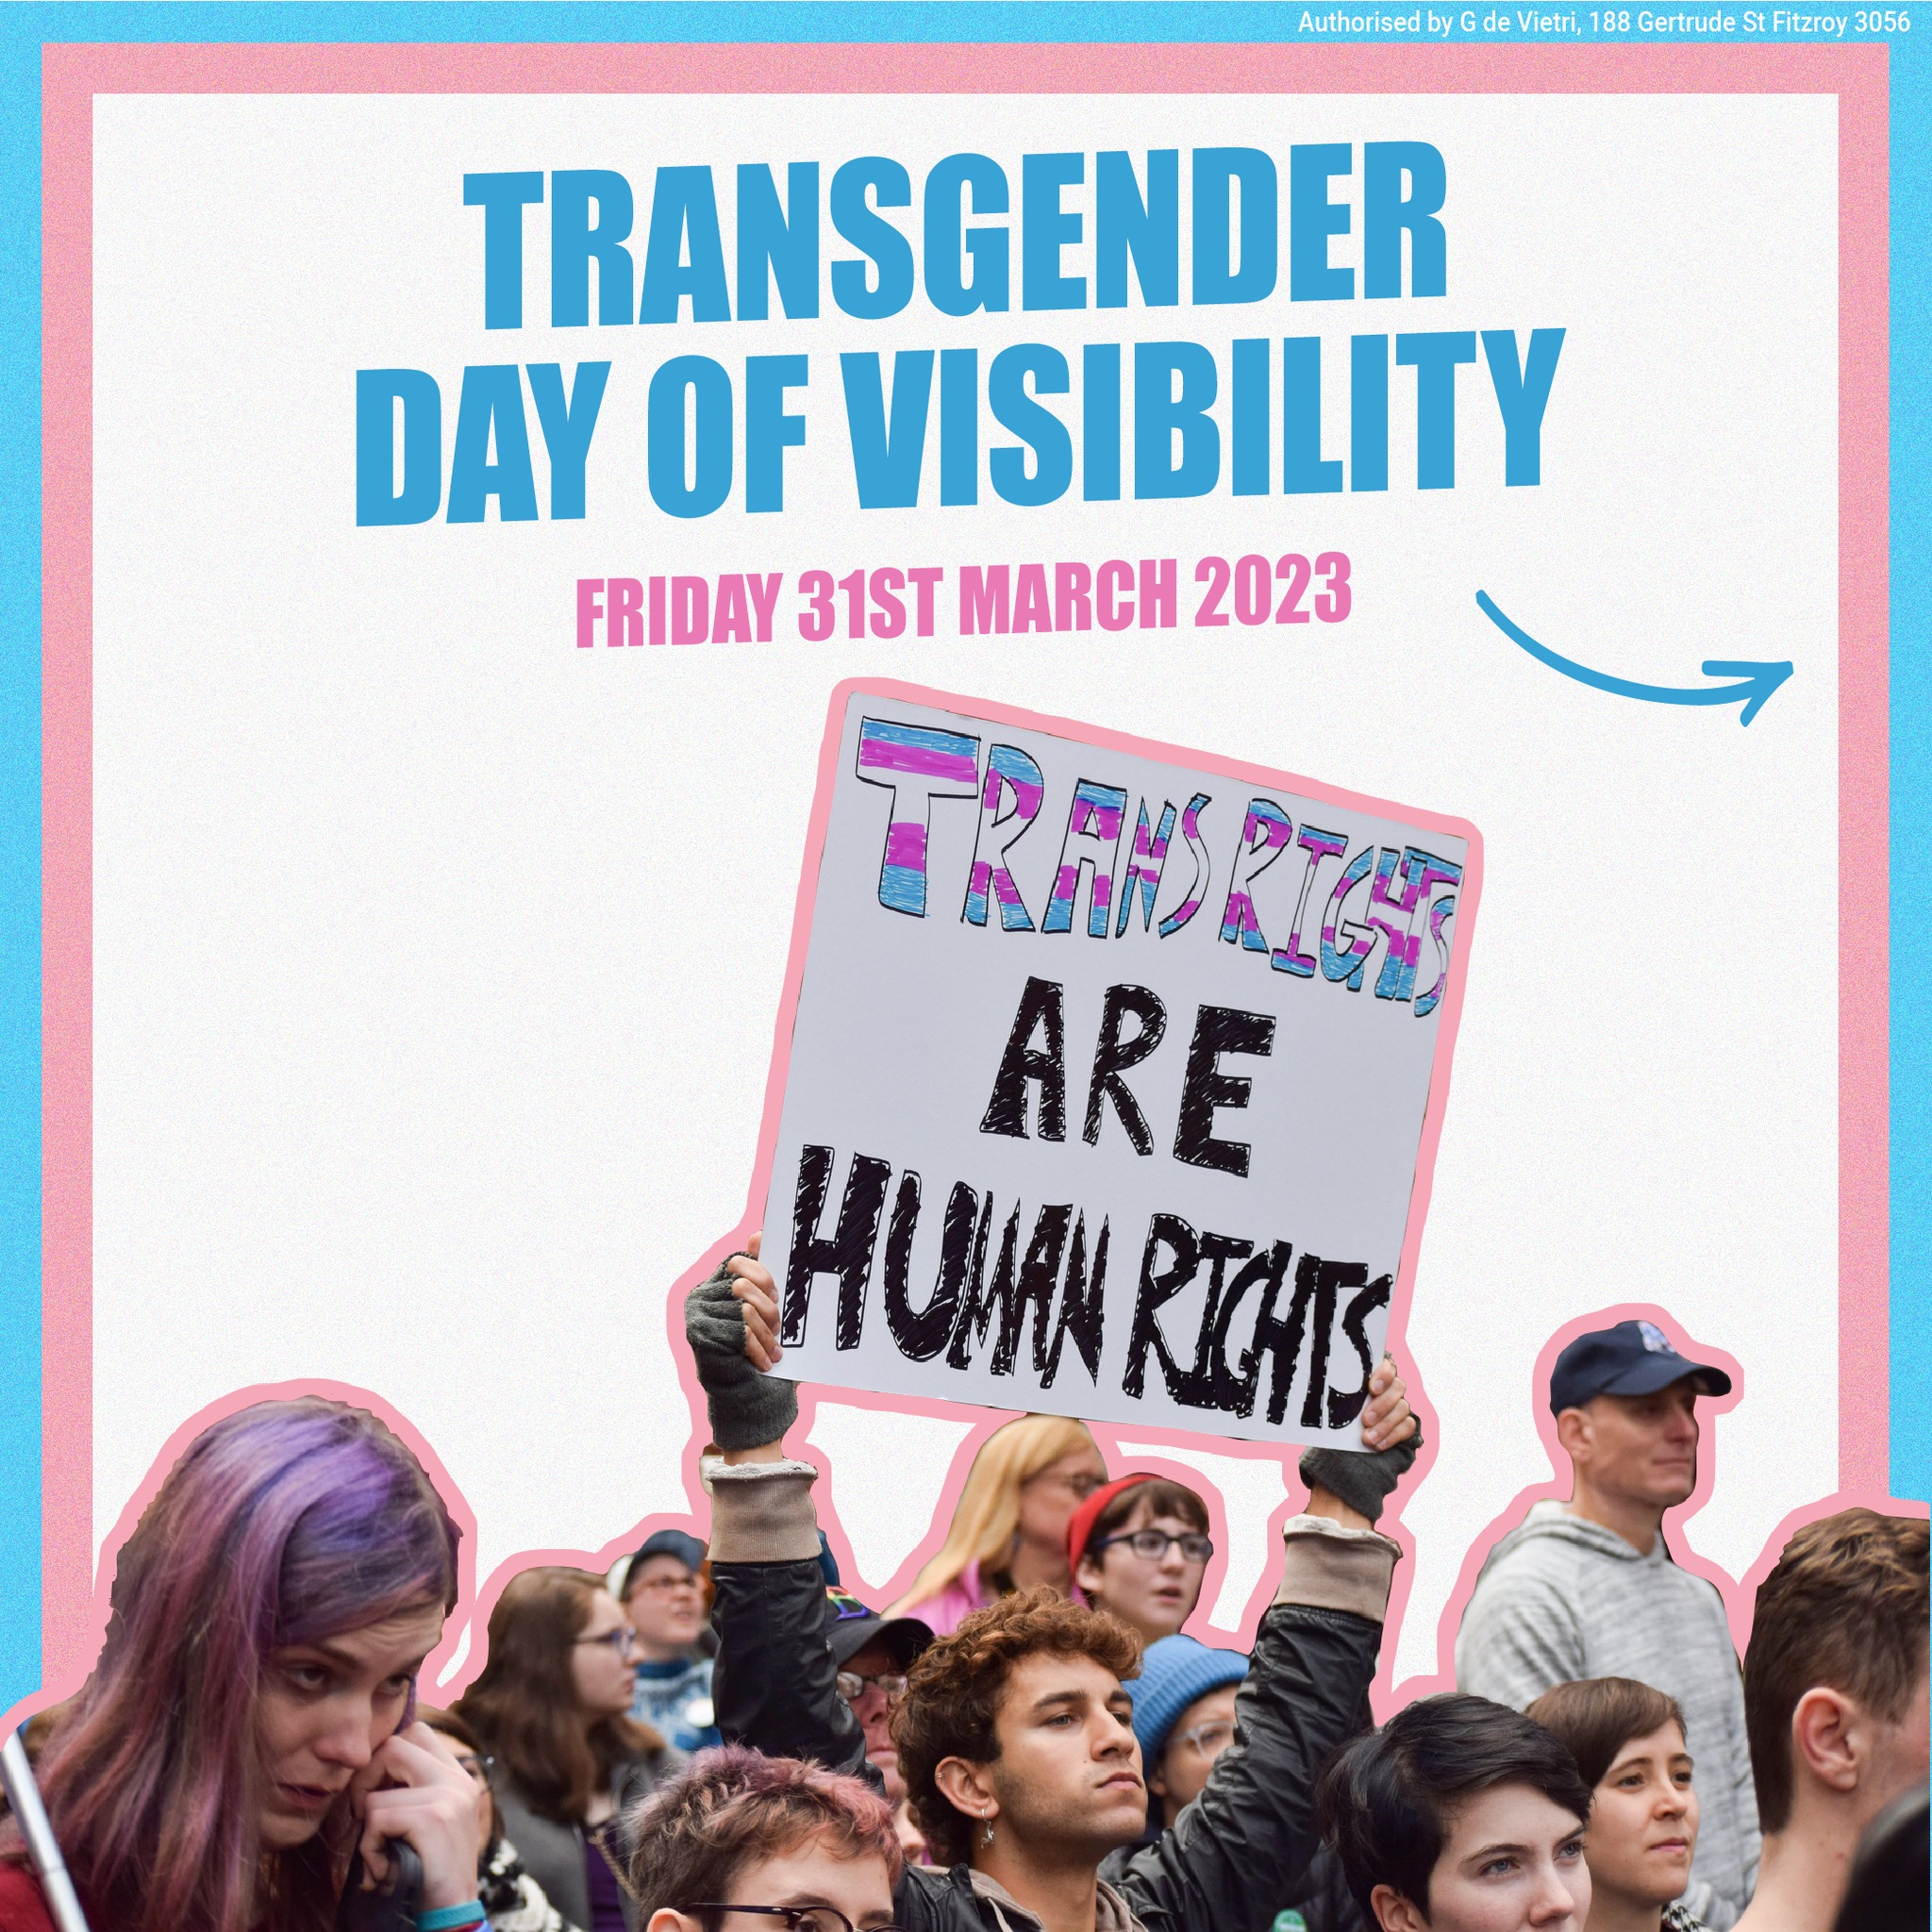 Today is #TransgenderDayOfVisibility, an important day to celeb...